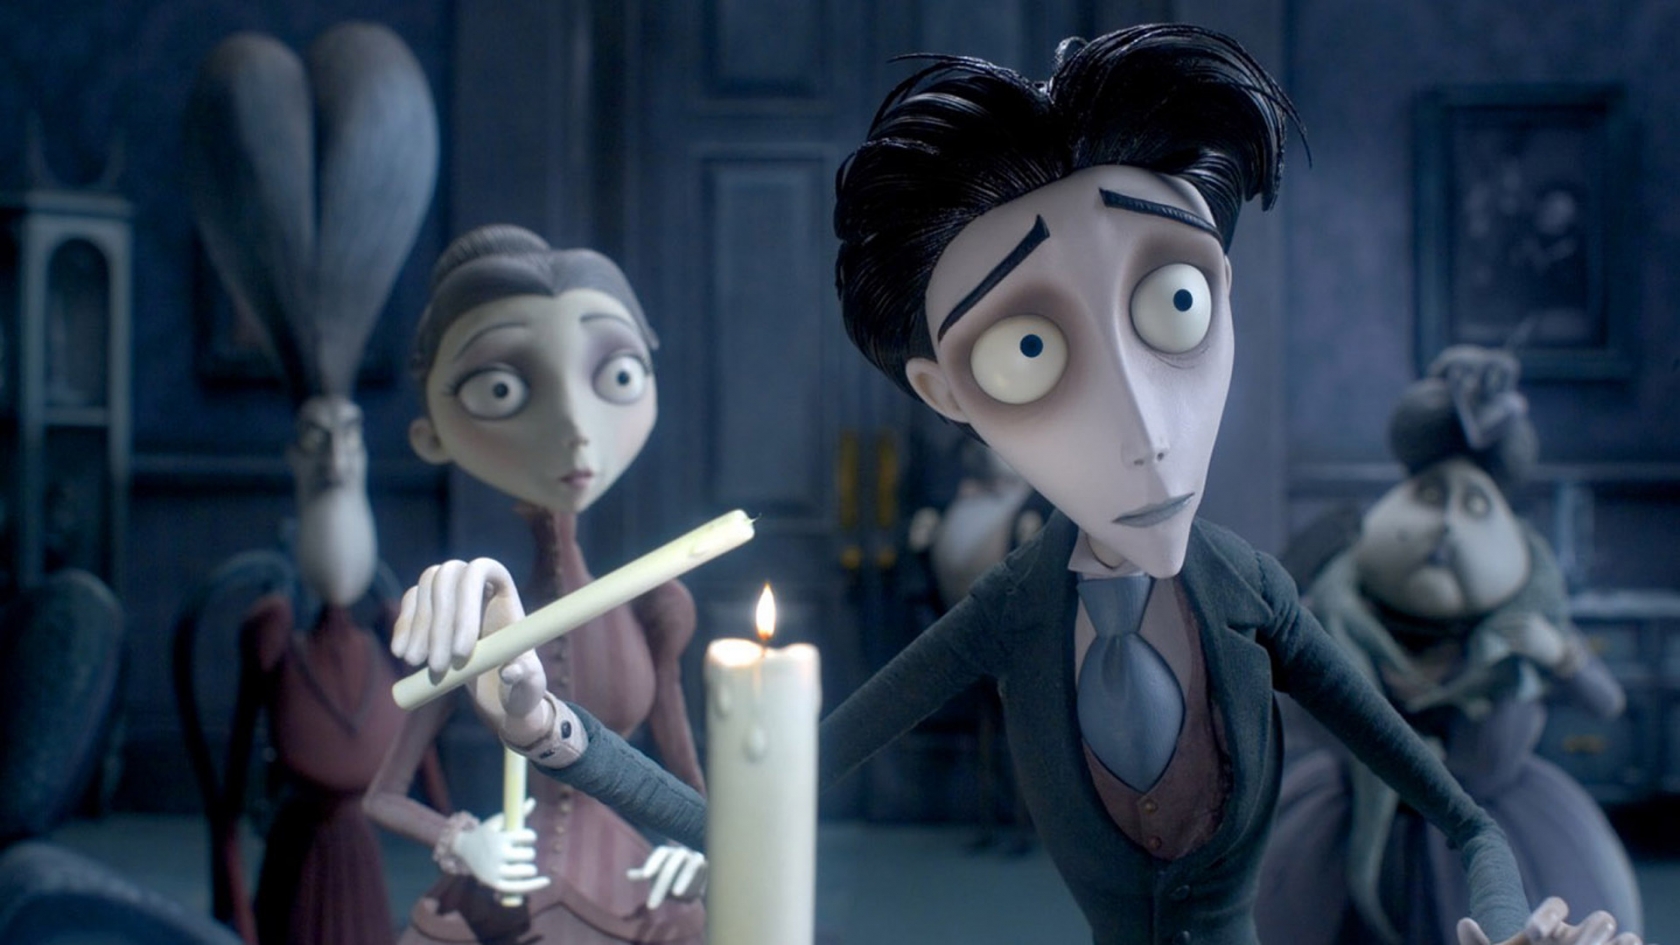 Corpse Bride for 1680 x 945 HDTV resolution